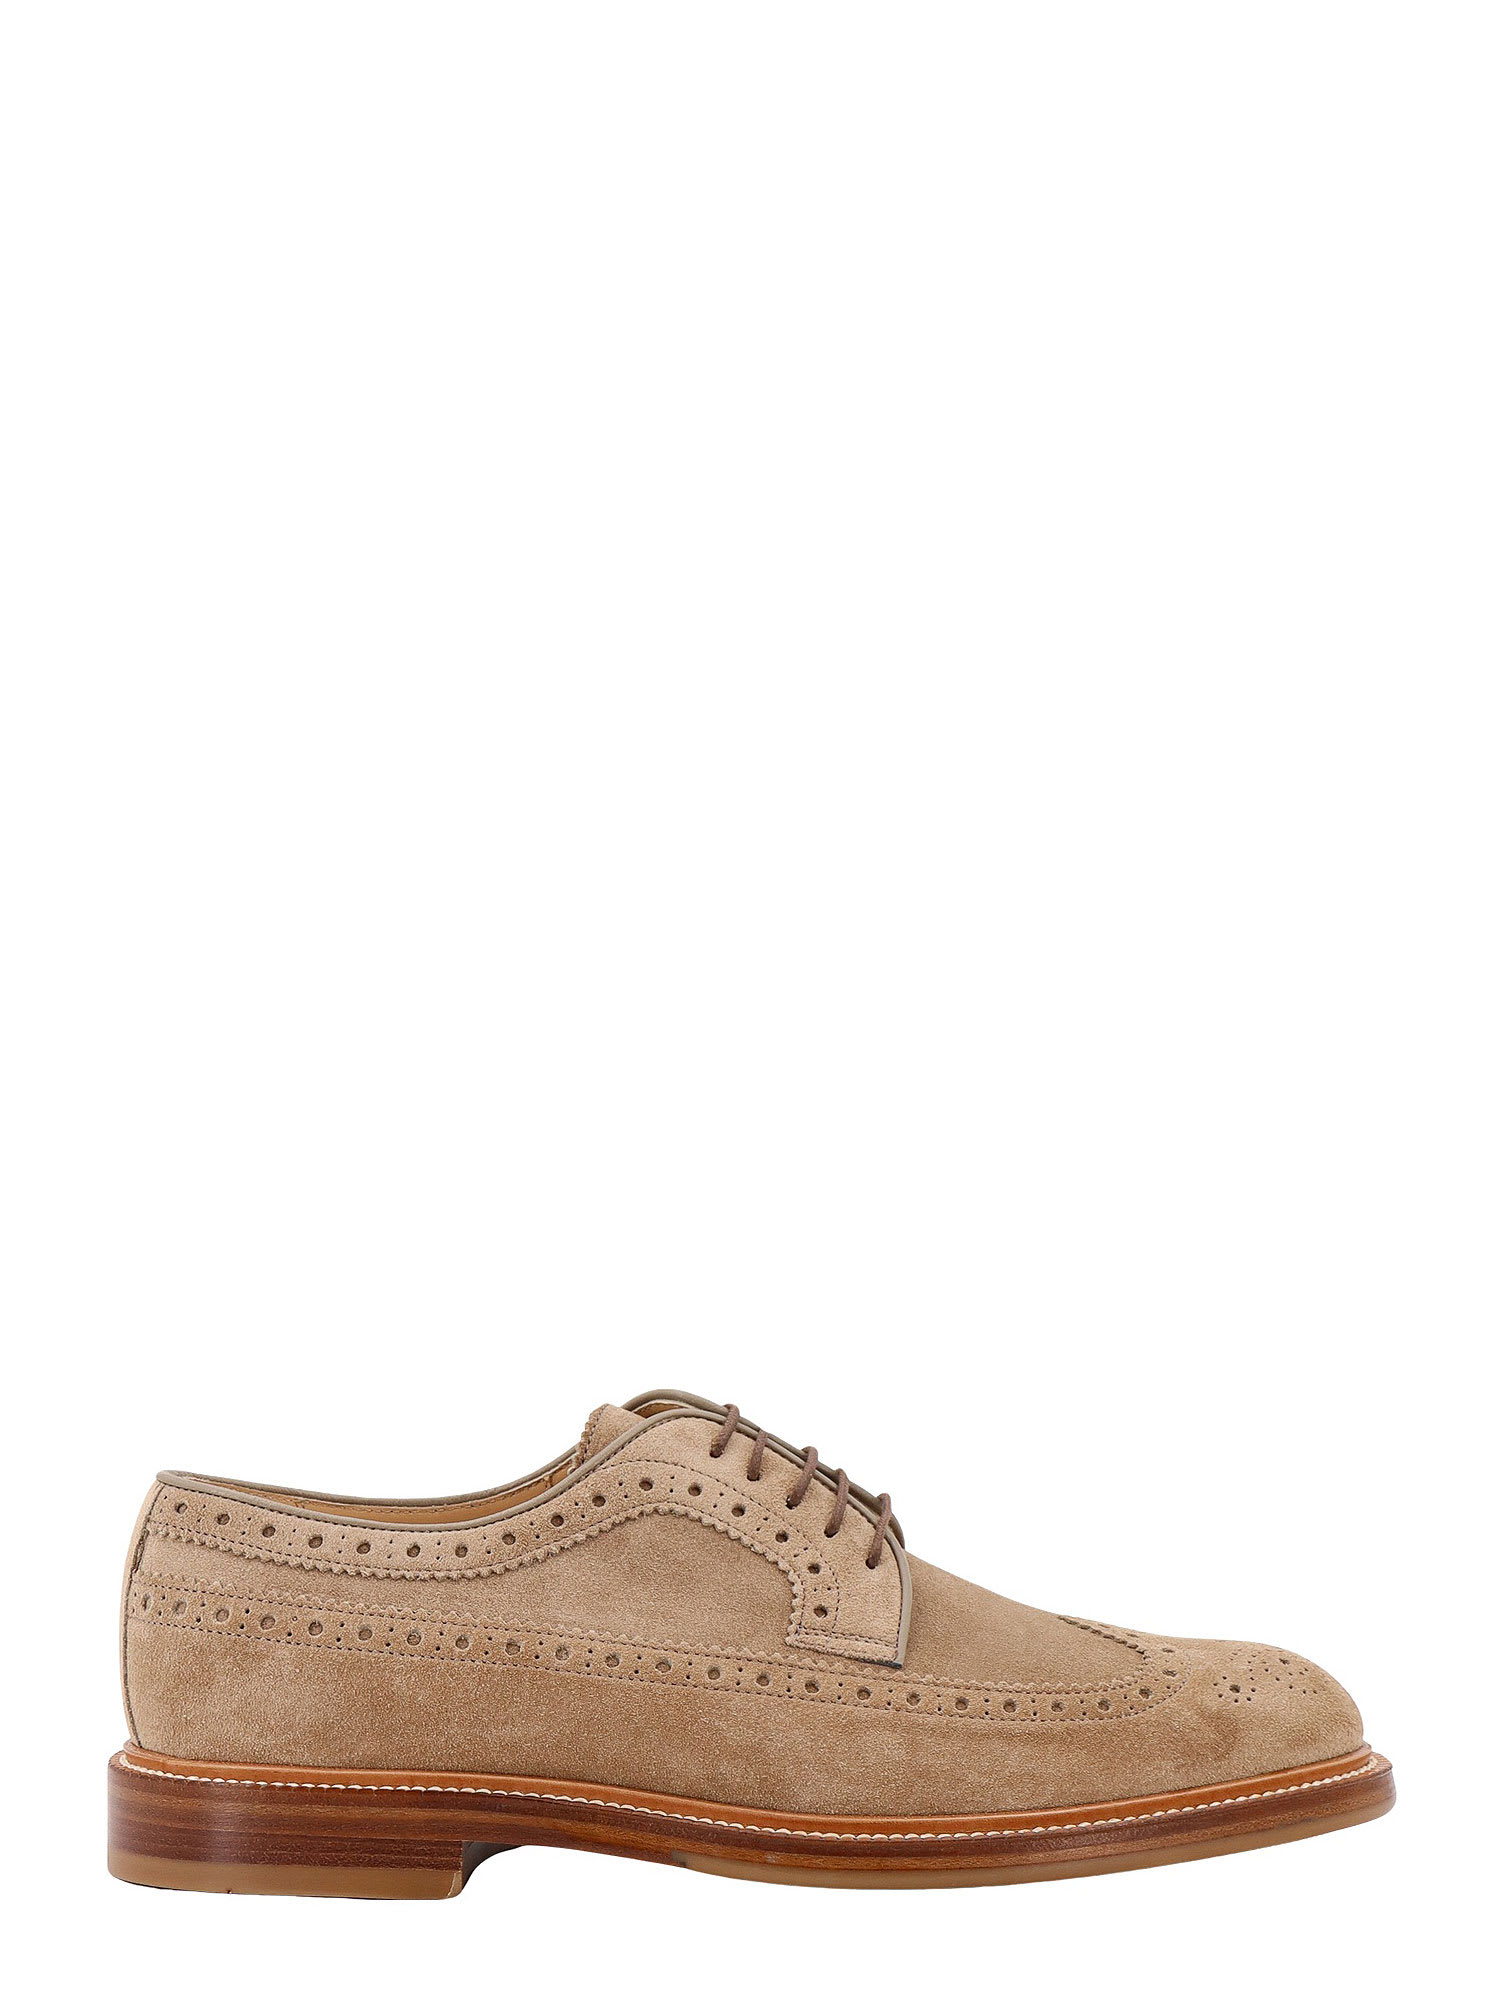 Longwing Brouge Lace-up Shoe